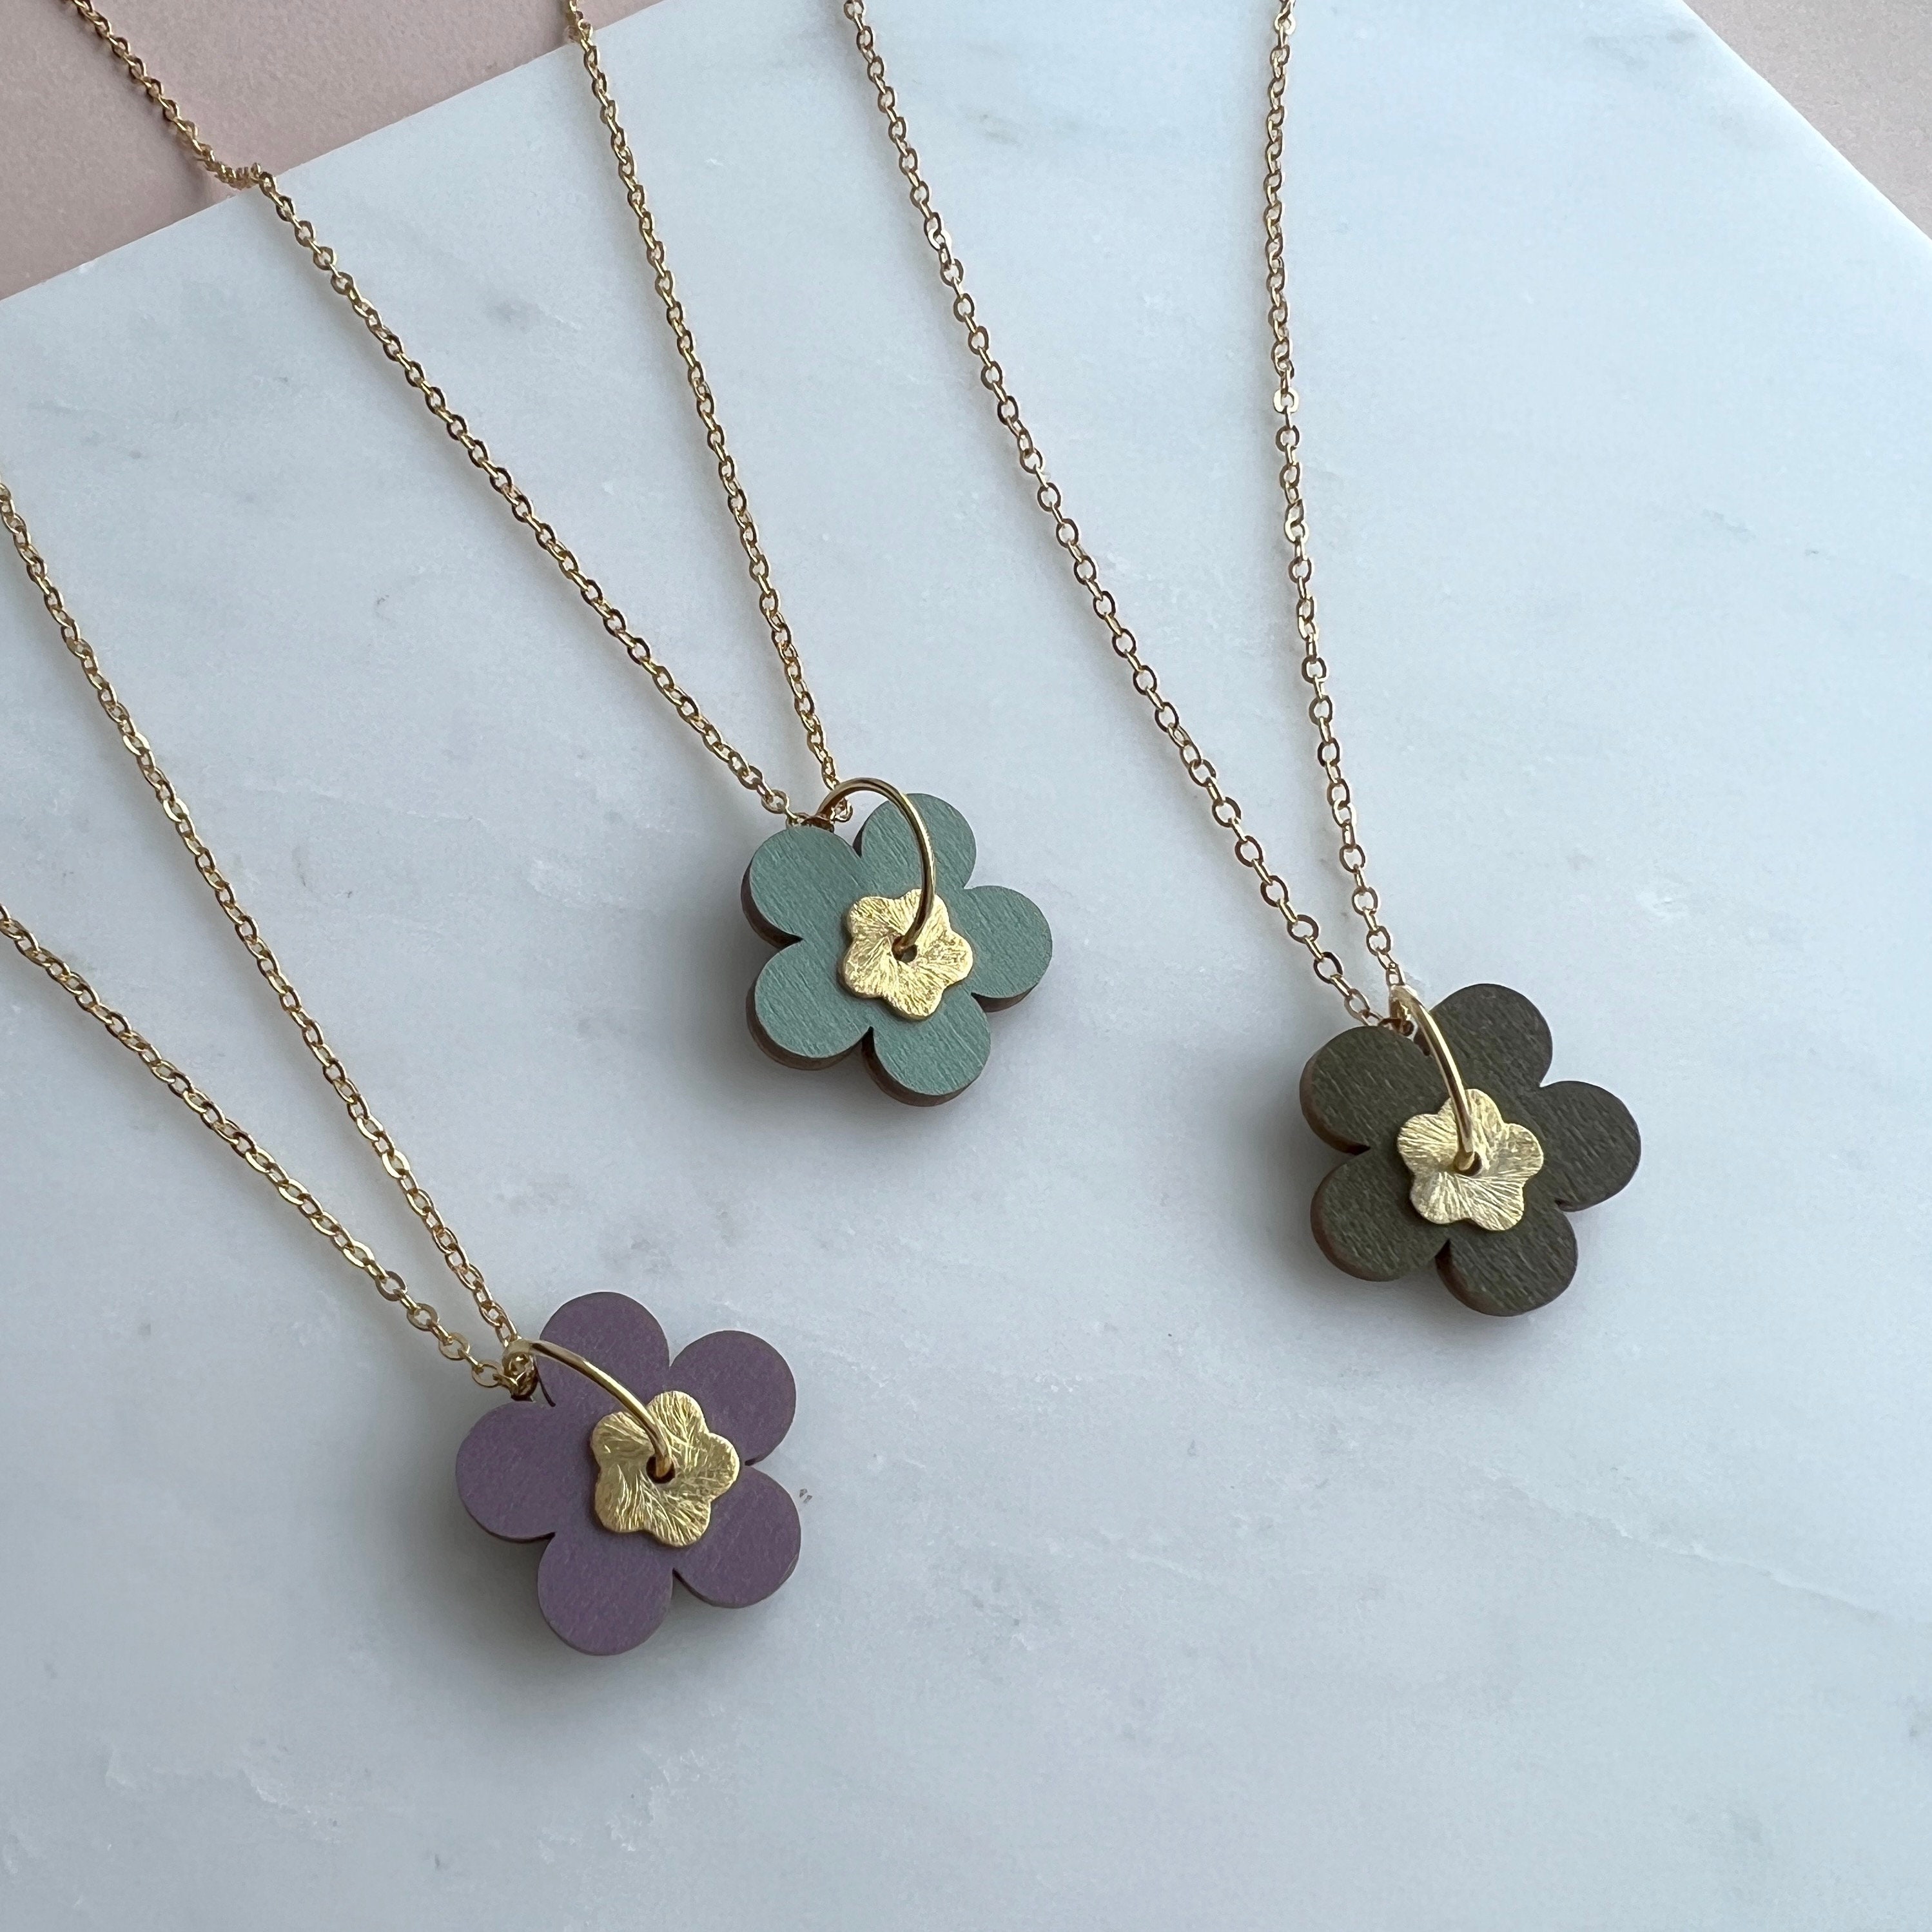 Colourful Flower Necklace - Minimal Gold Pendant